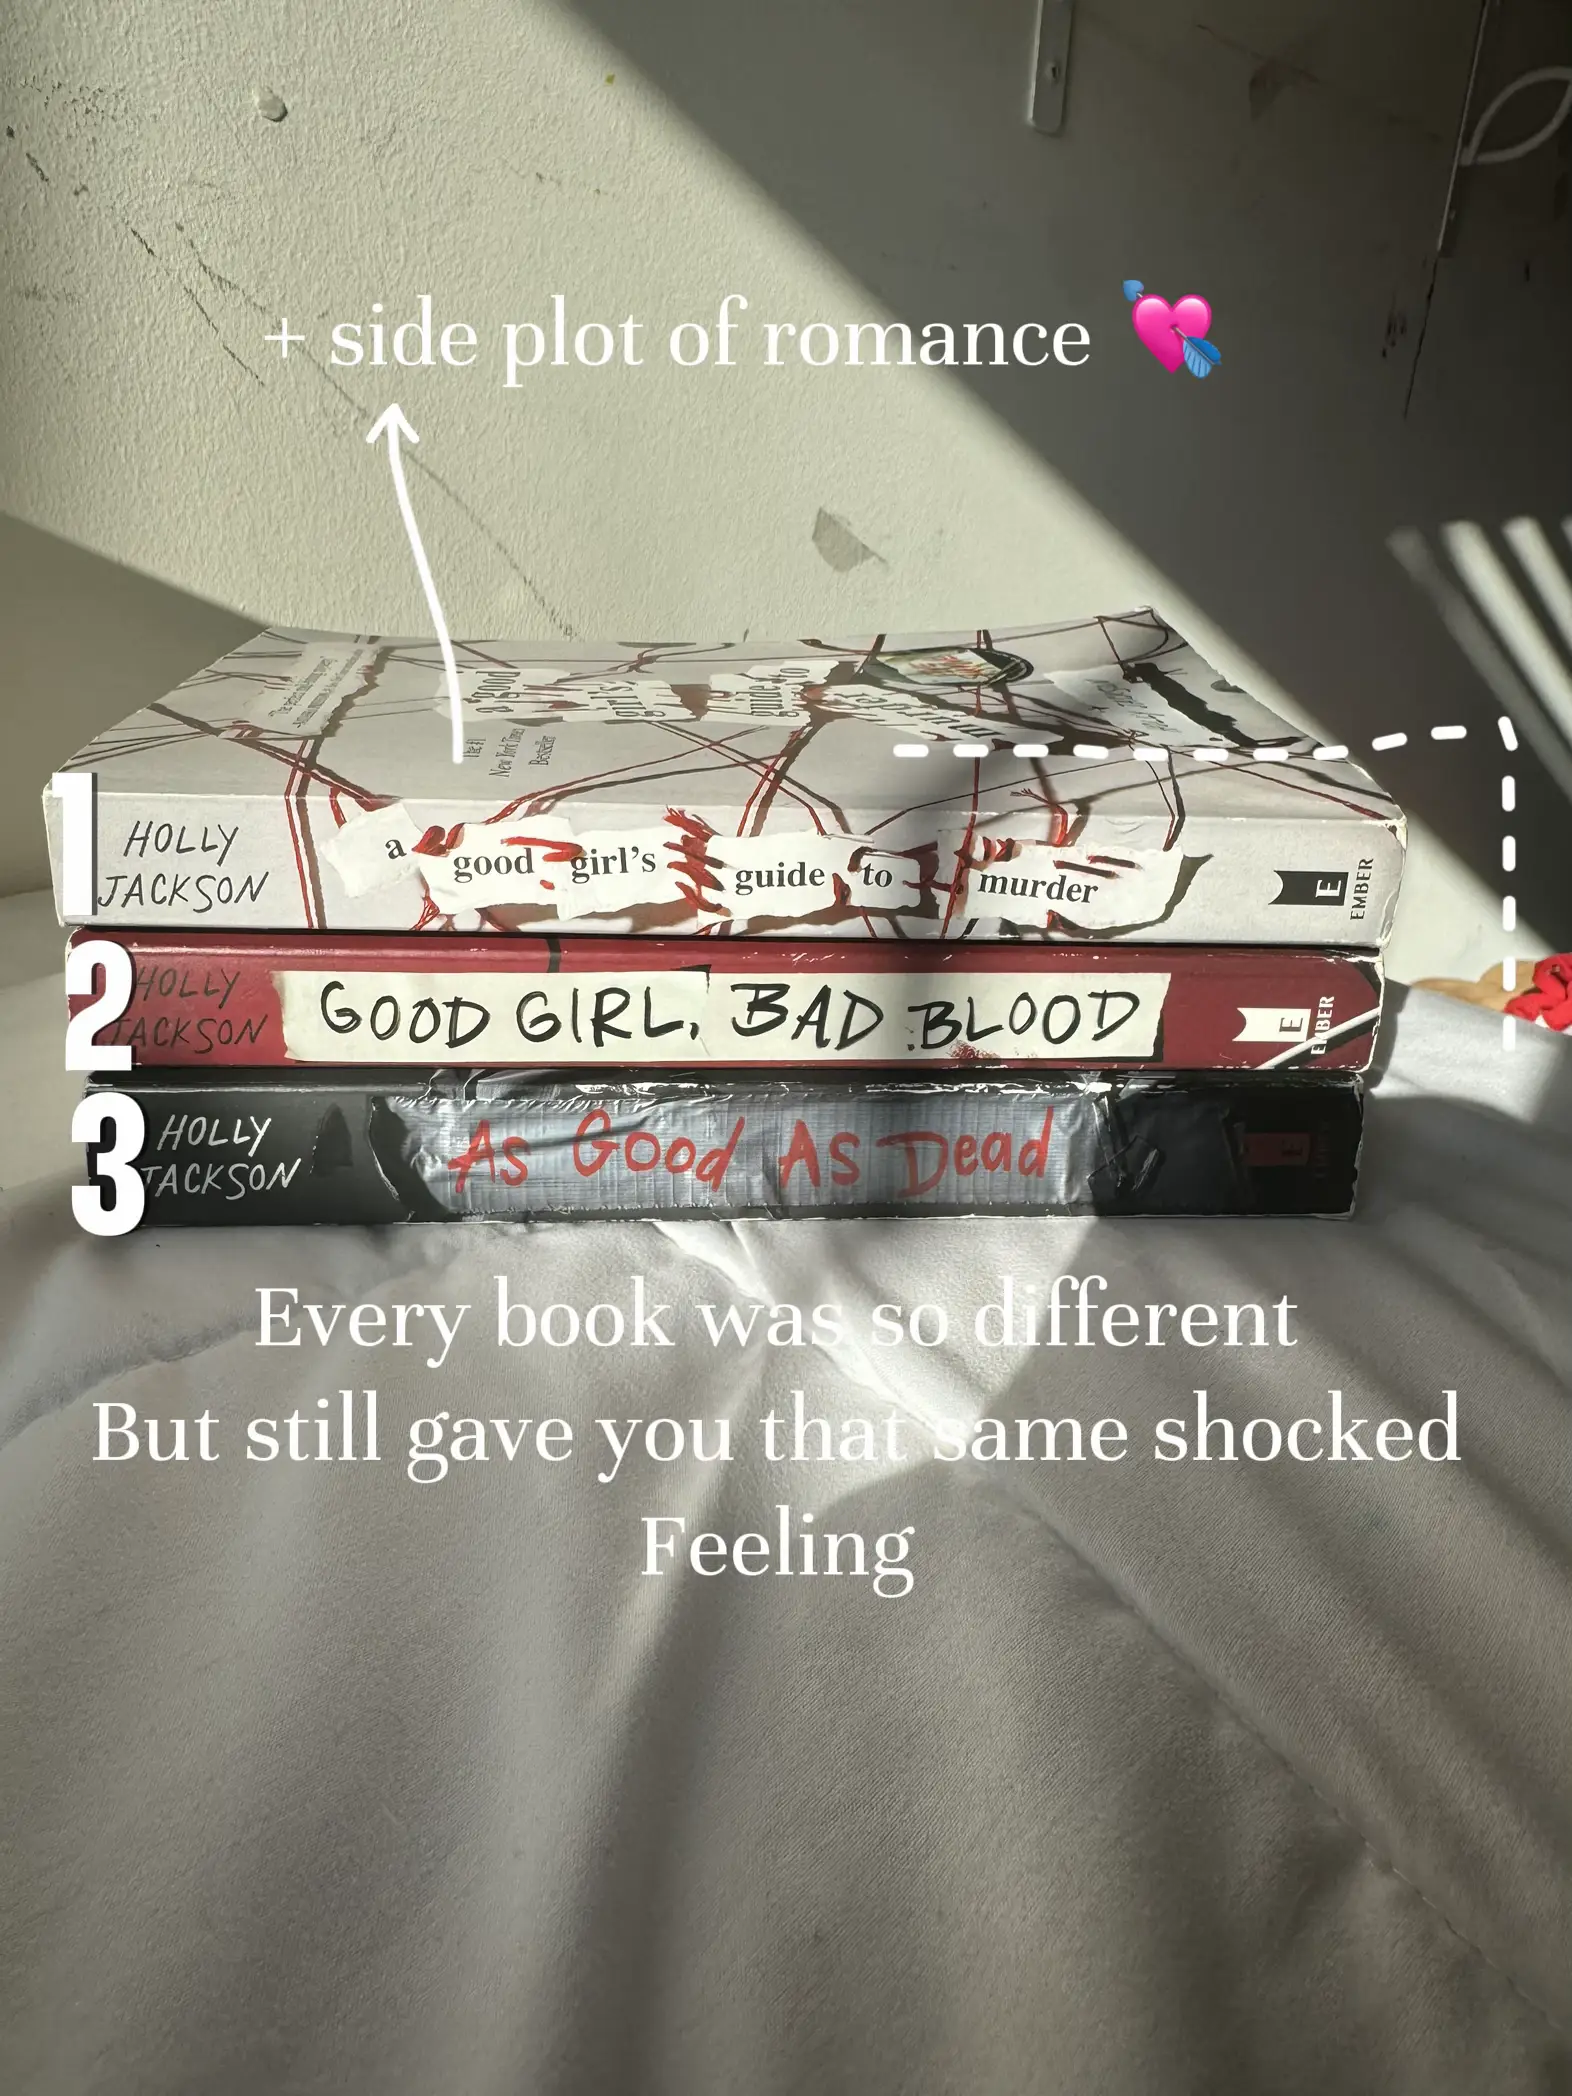  Three books are lined up on a table, with each book having a different title. The books are titled "Holly Good Girl", "Bad Blood", and "As Good As Dead".